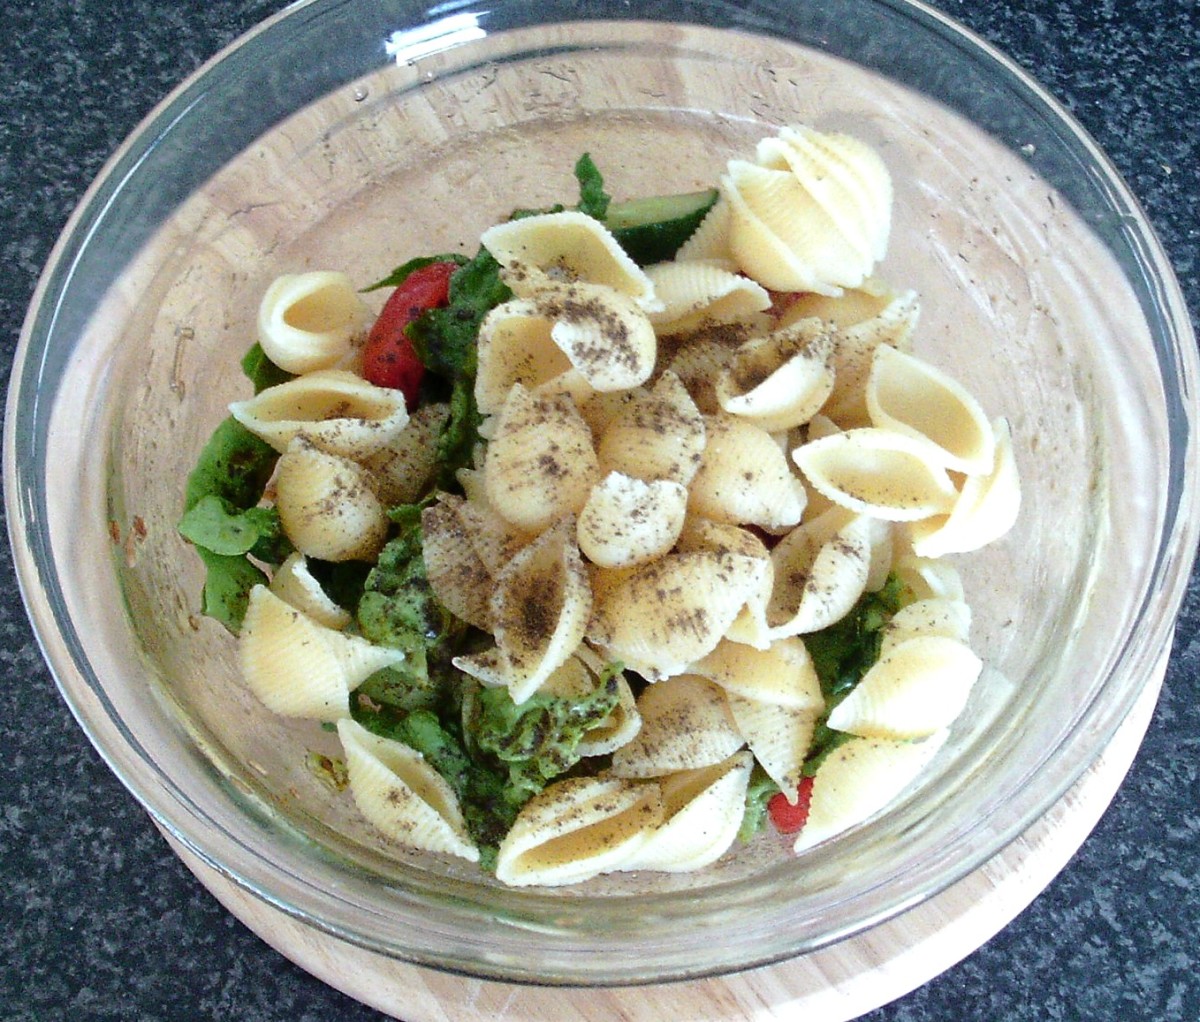 Add cooled conchiglie pasta to the salad